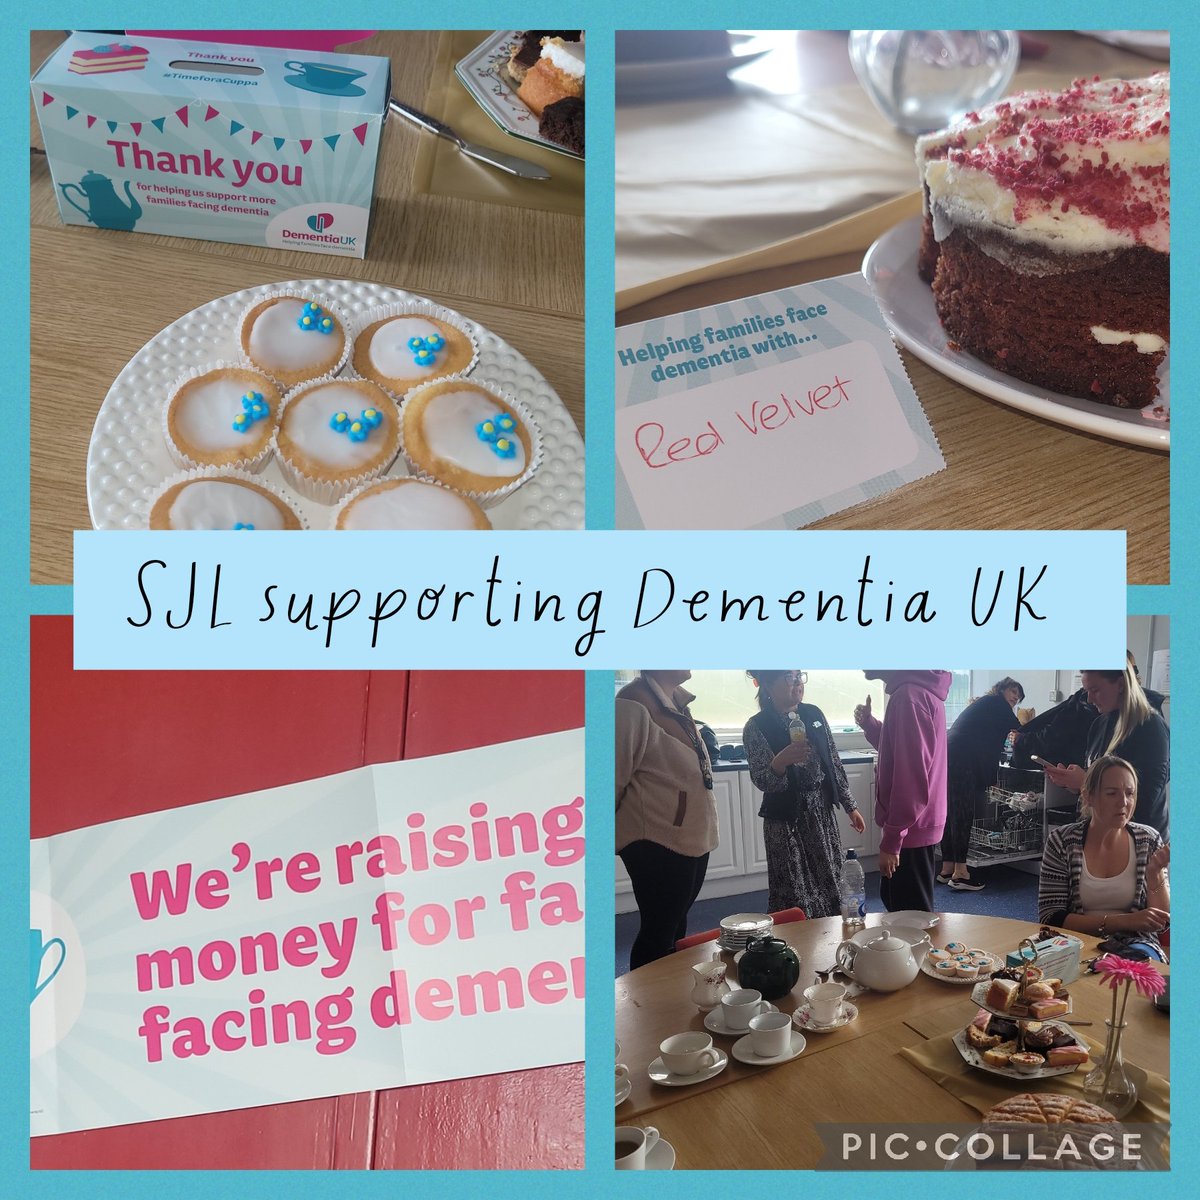 💙💕 A huge thank you to Mrs Moss and the staff @SJLCARDIFF for organising a tea party after school for @DementiaUK . Over £155 was raised and a welcoming end to our day. 'The miracle is this, the more we share the more we have ' 💕💙